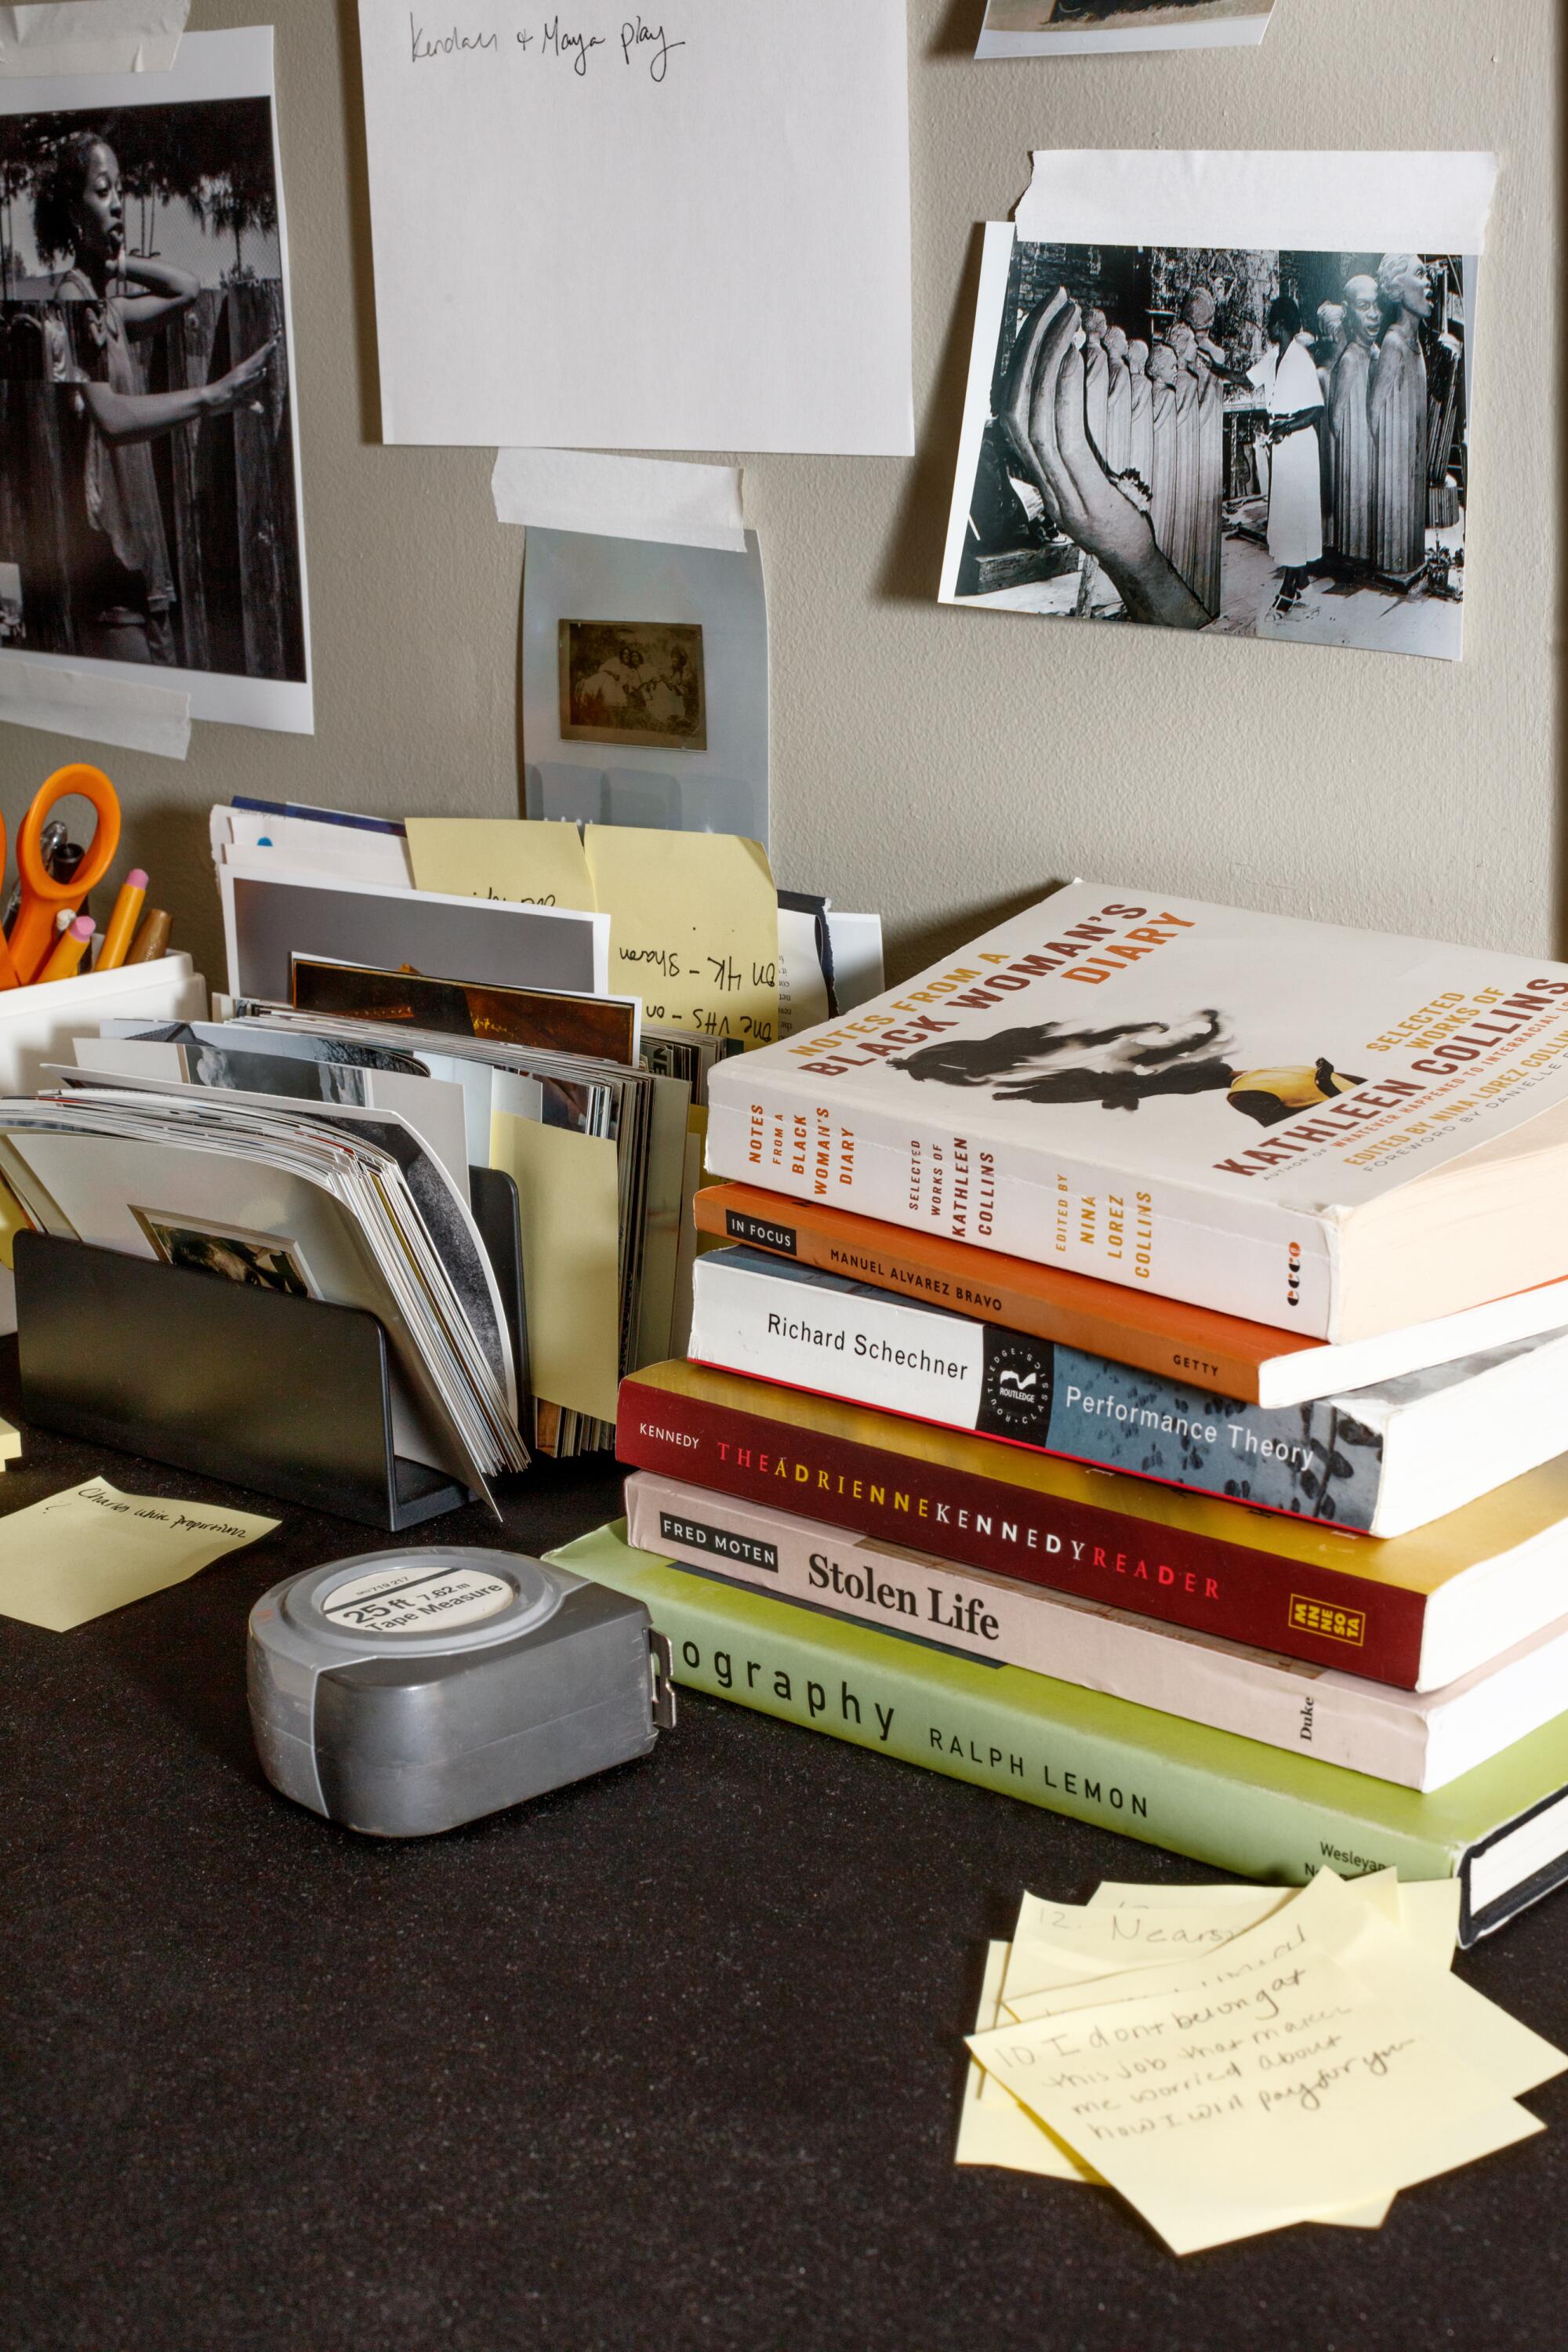 Detail view of a desk with stacked books, measuring tape, yellow post-it notes, and images taped to the wall.